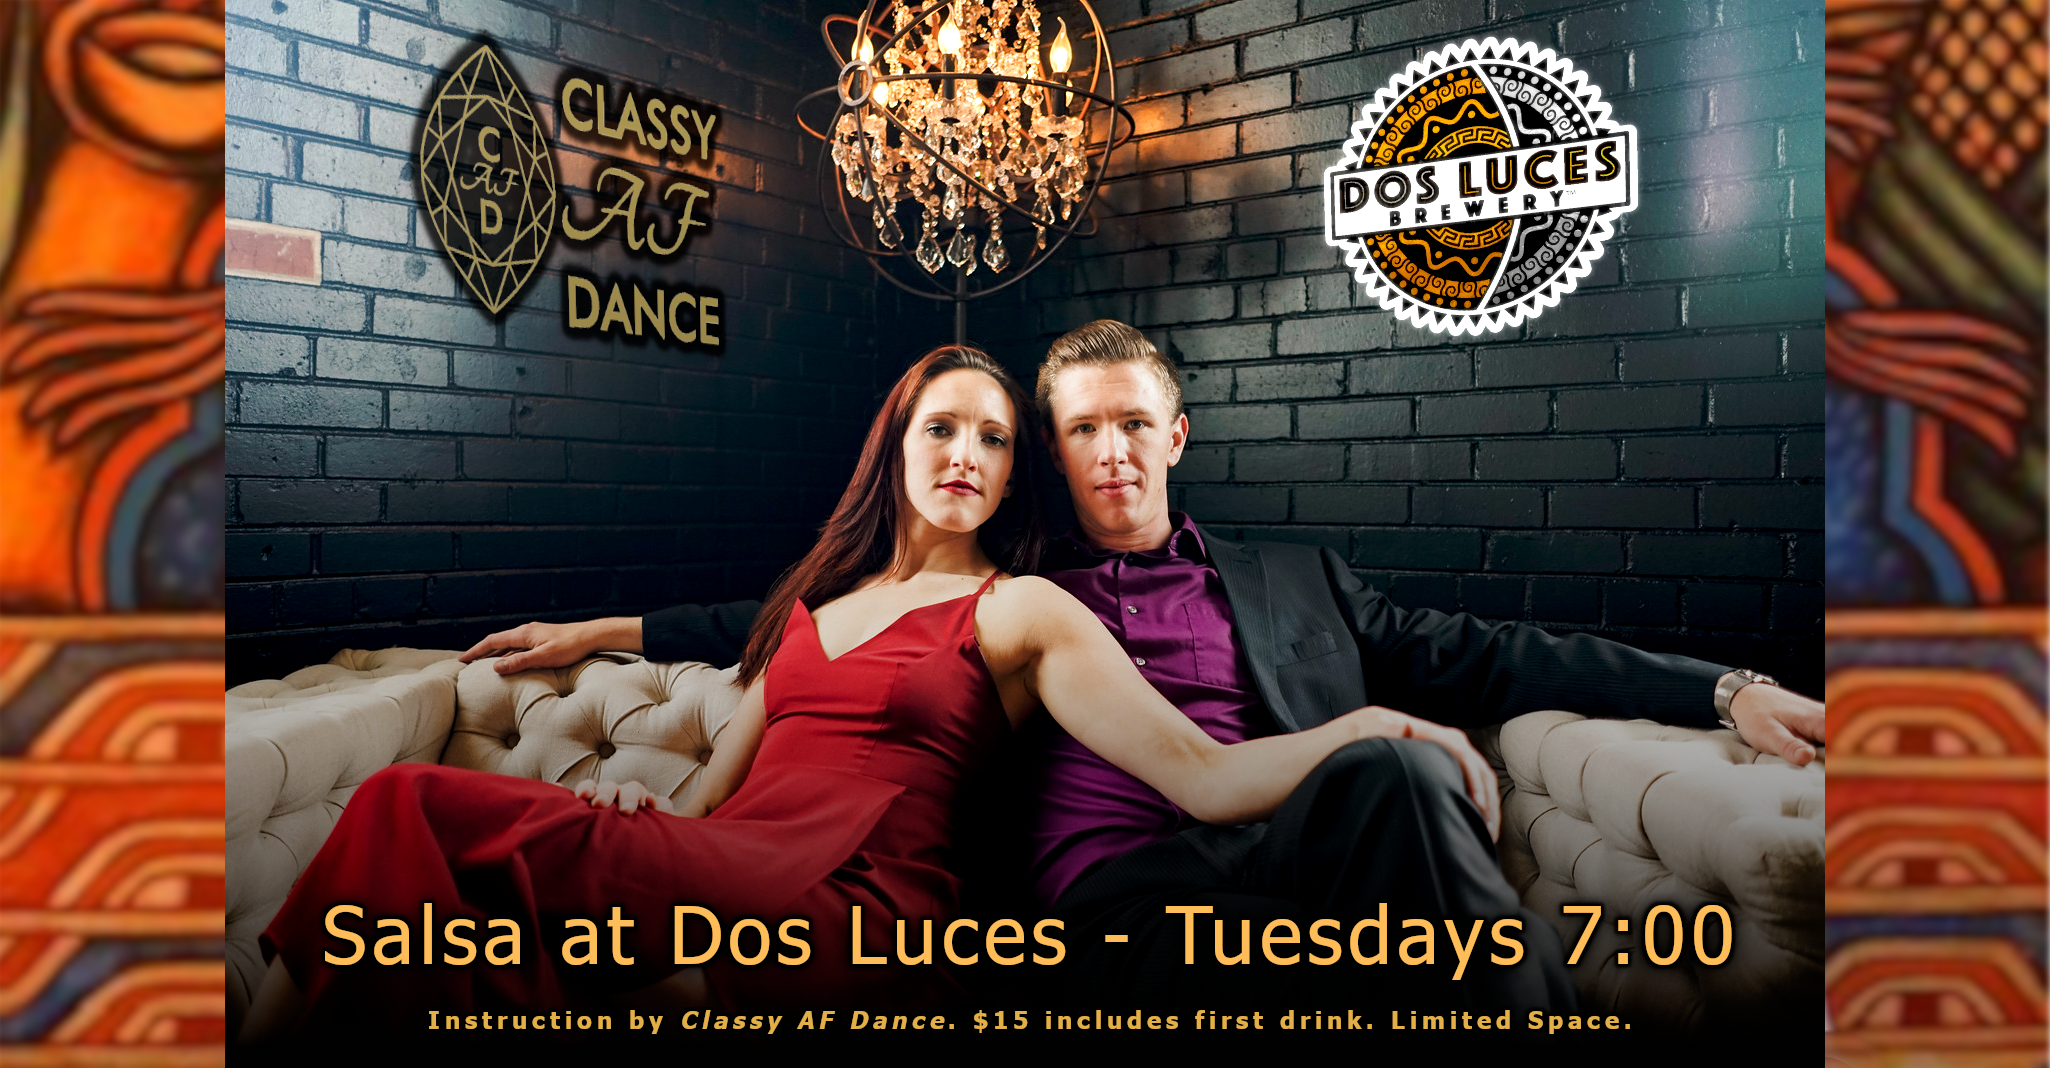 Salsa Lessons and a Beer at Dos Luces Brewery